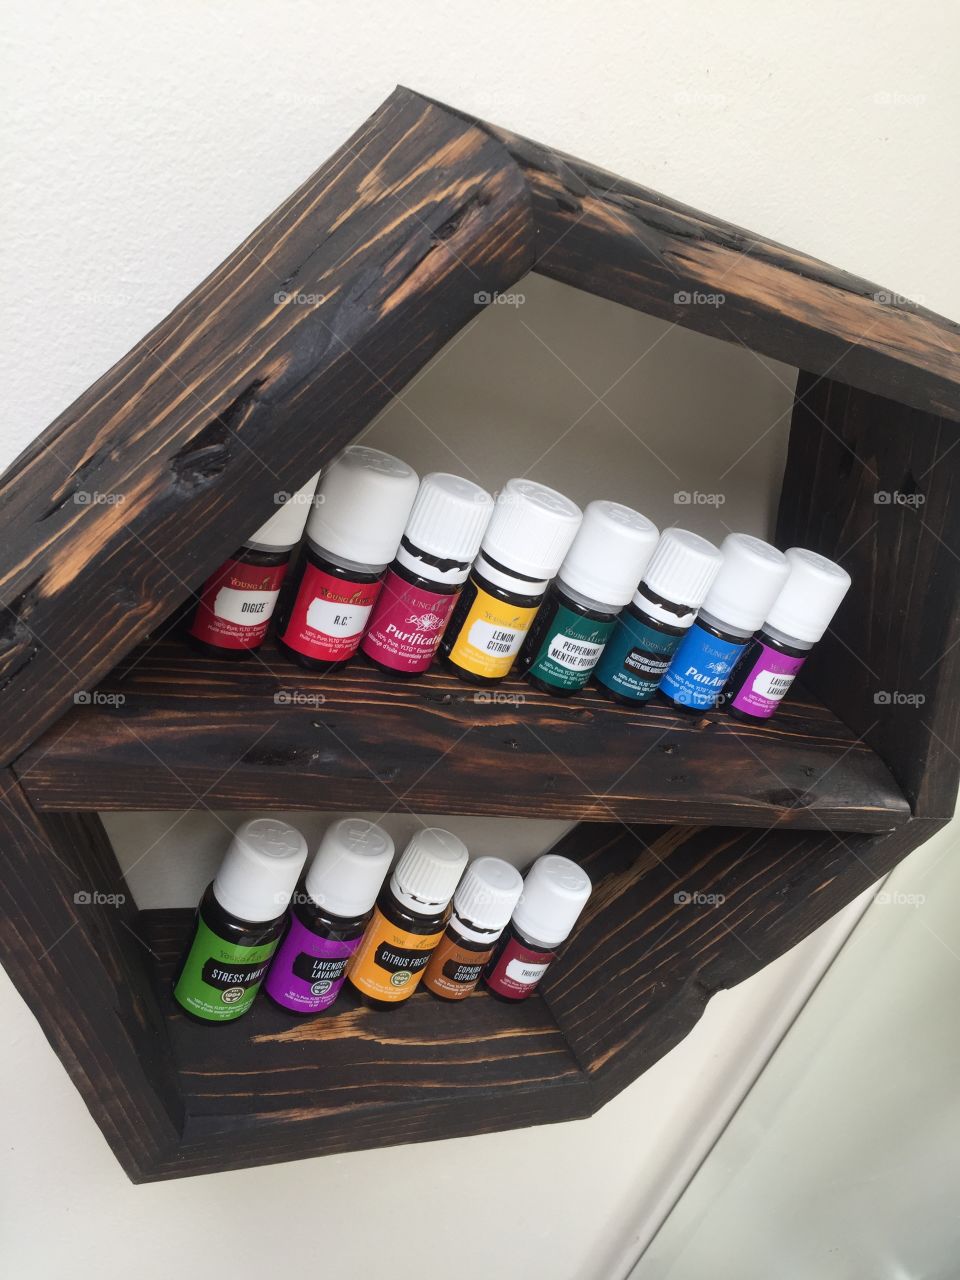 My natural wellness shelf with young living essential oils